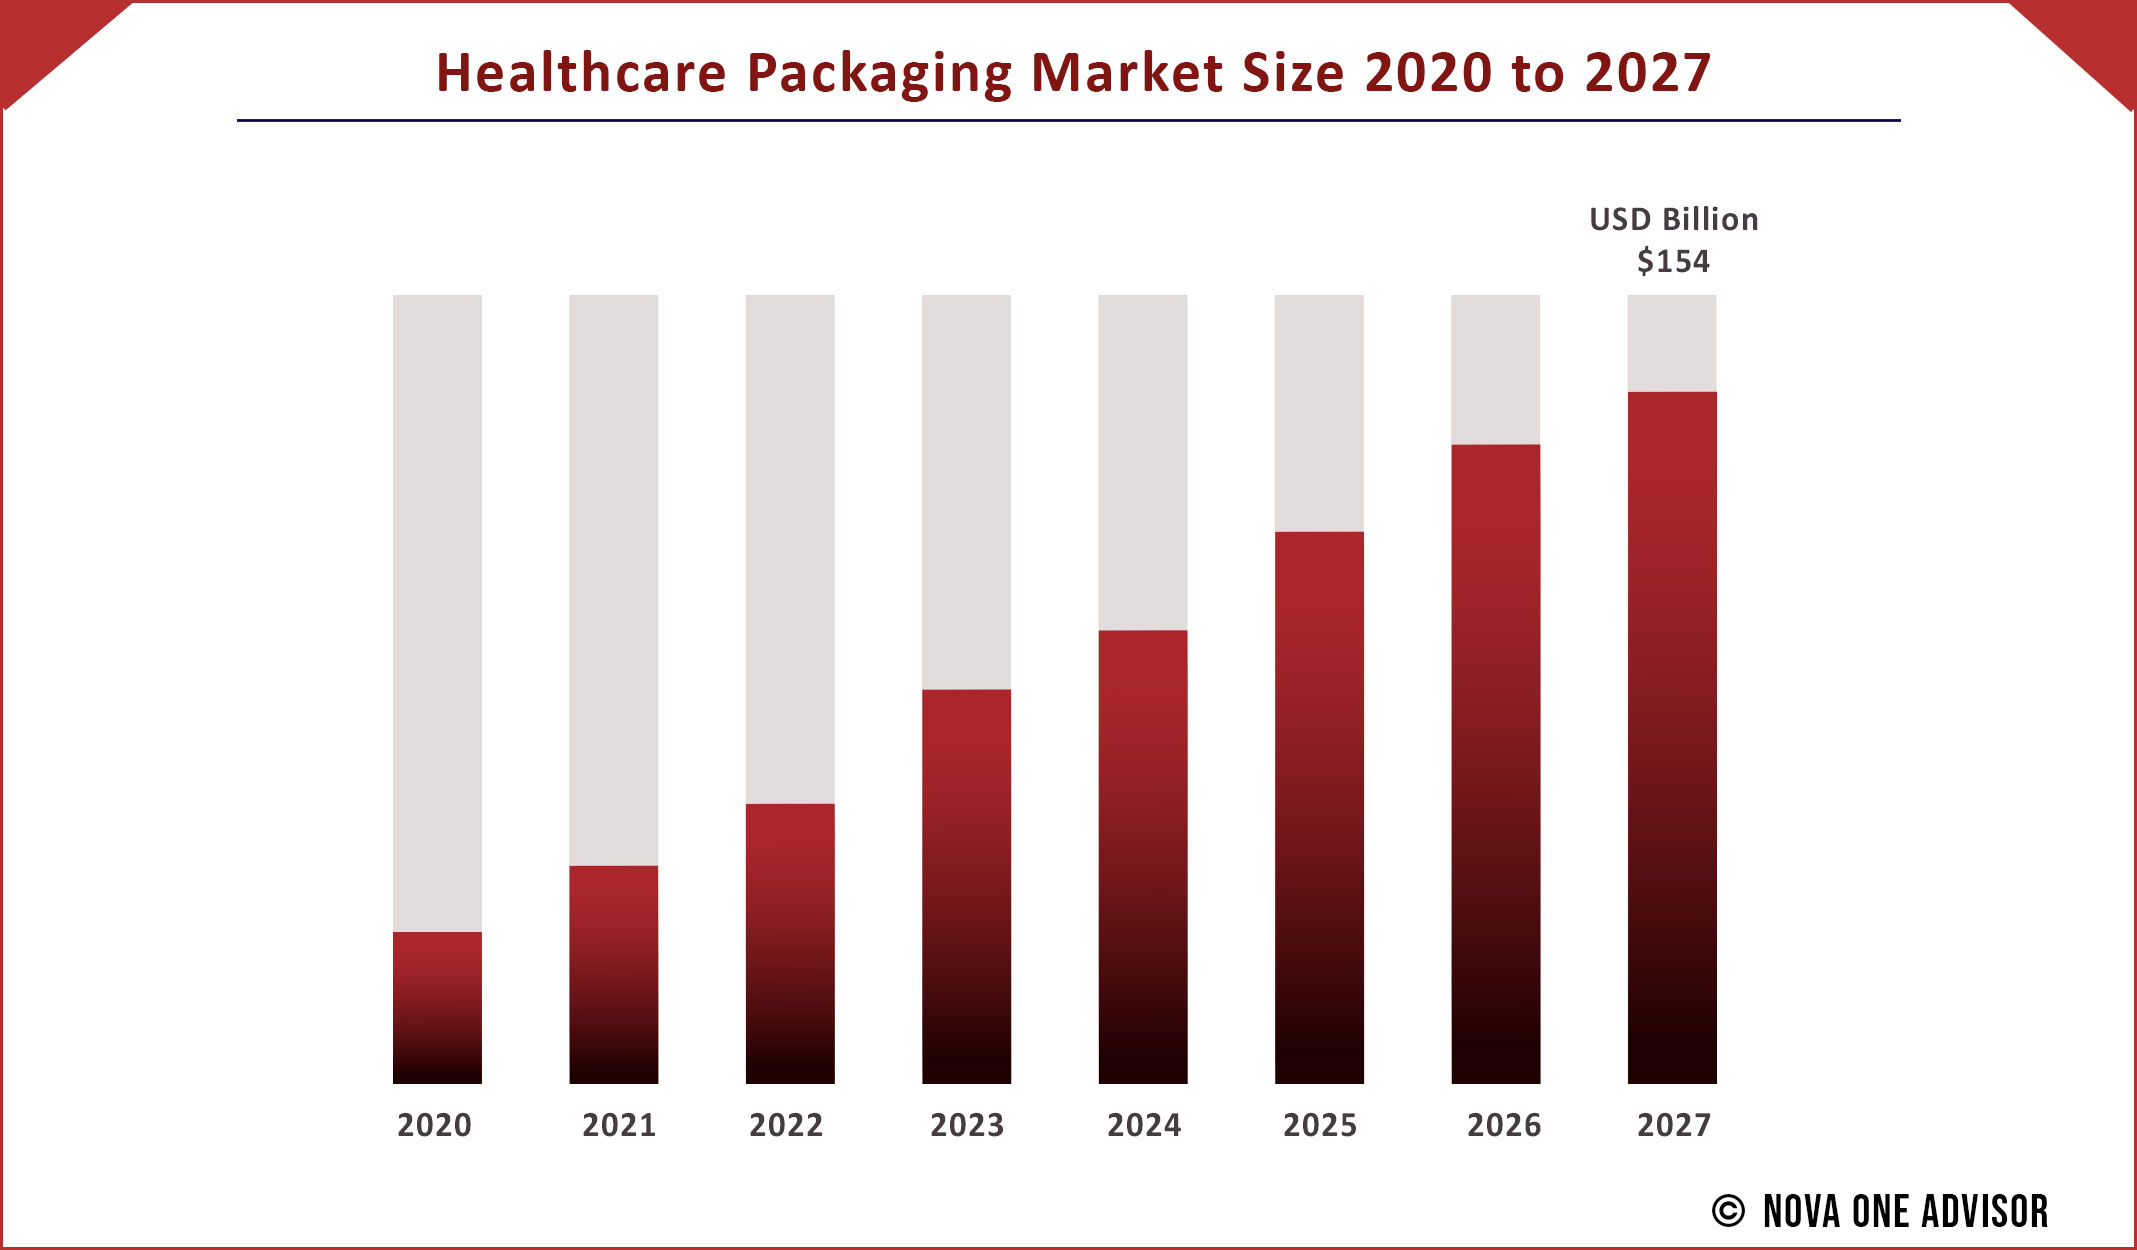 Healthcare Packaging Market Size 2020 to 2027